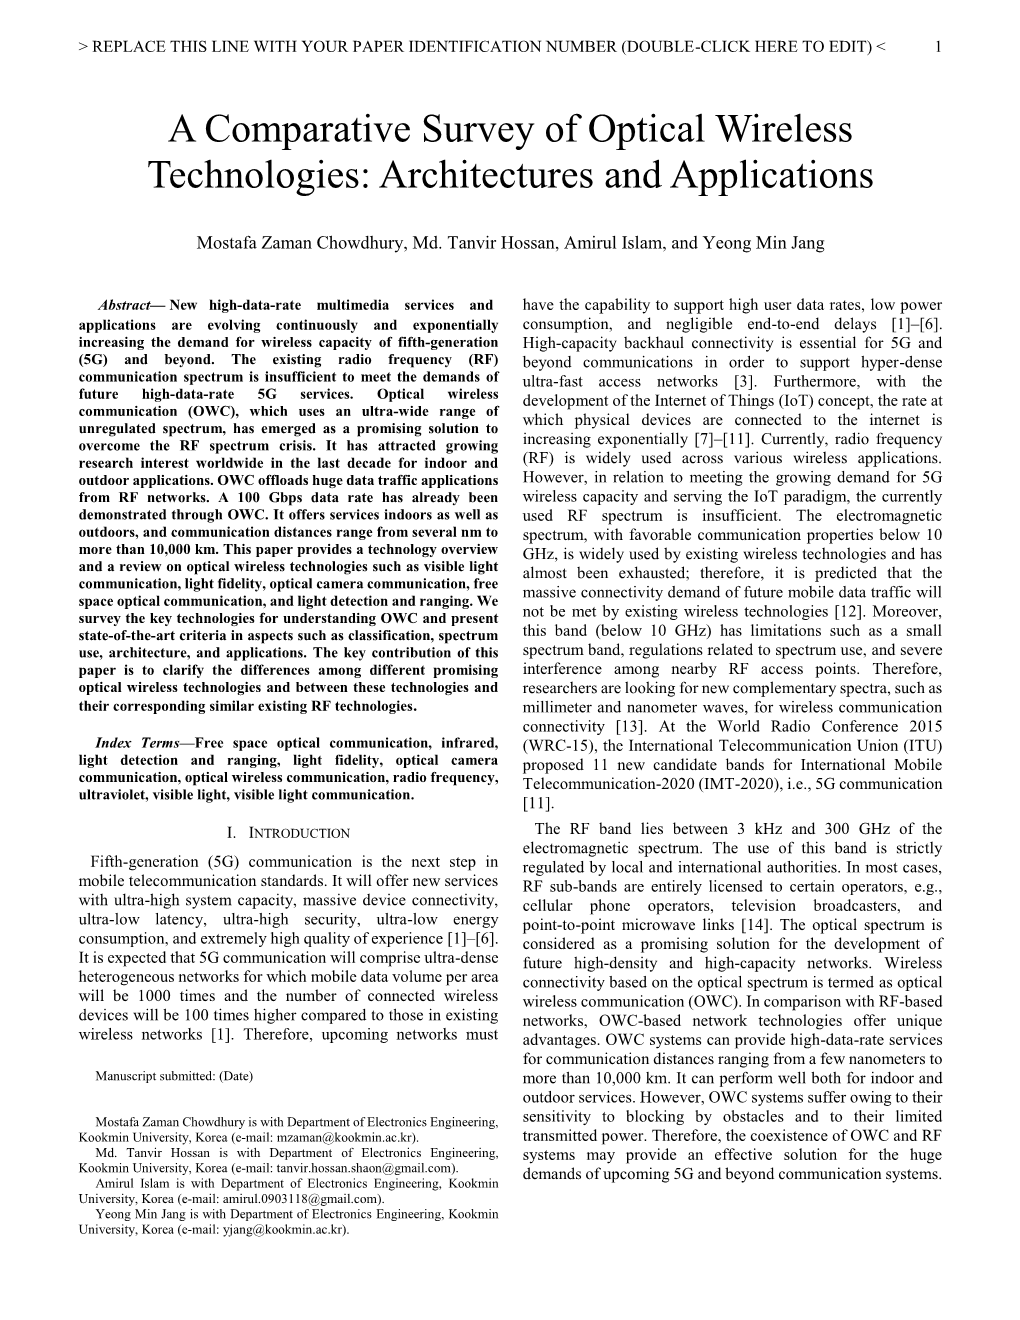 A Comparative Survey of Optical Wireless Technologies: Architectures and Applications